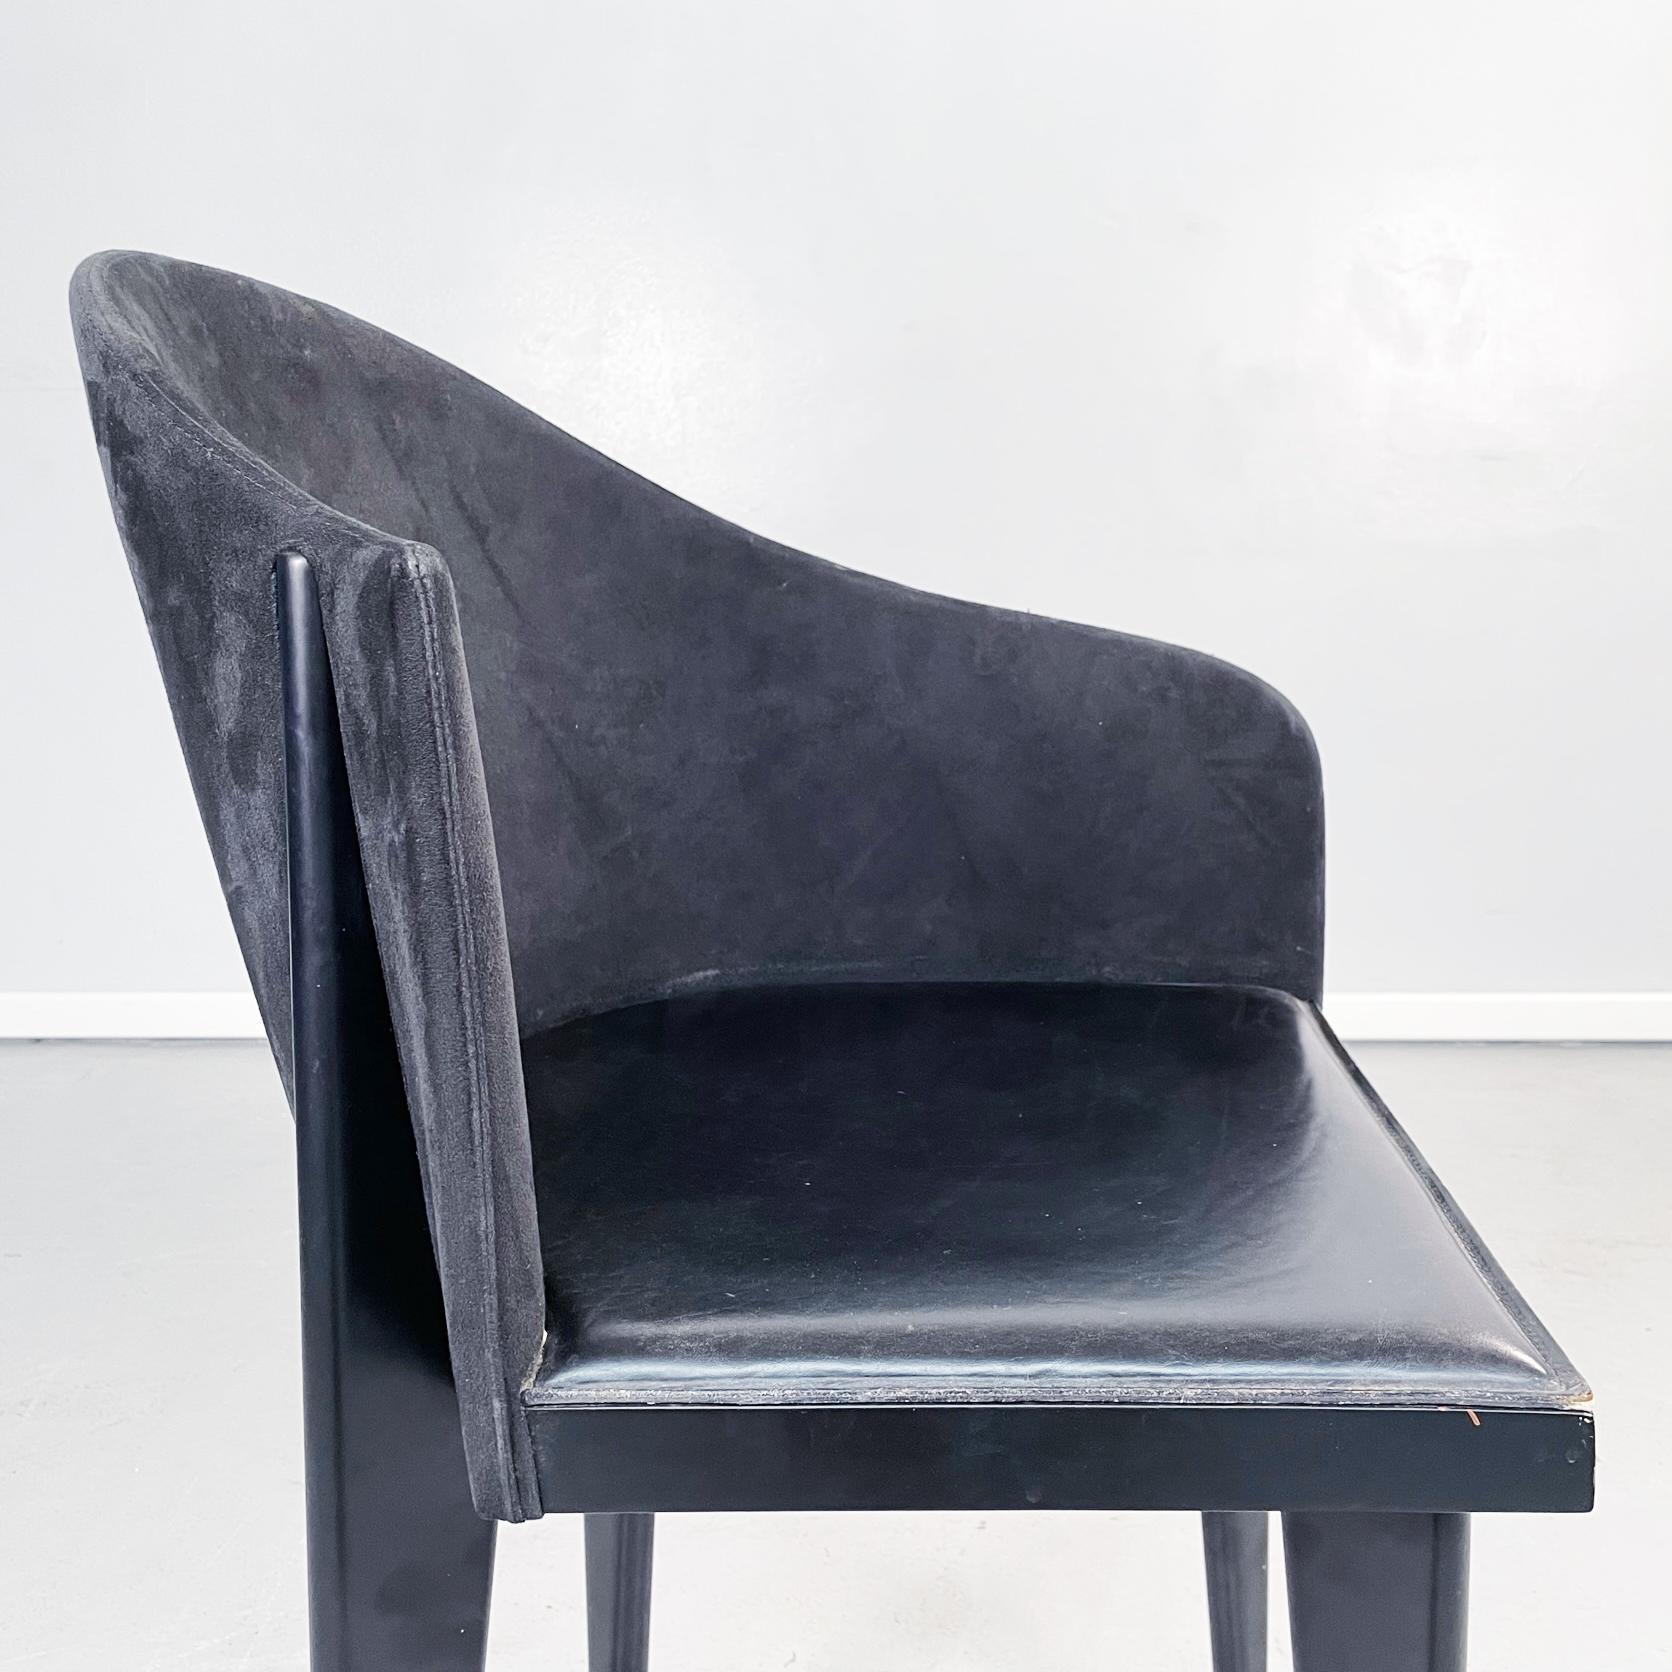 Italian Modern Black Chairs Toscana by Sartogo and Grenon for Saporiti, 1980s For Sale 3